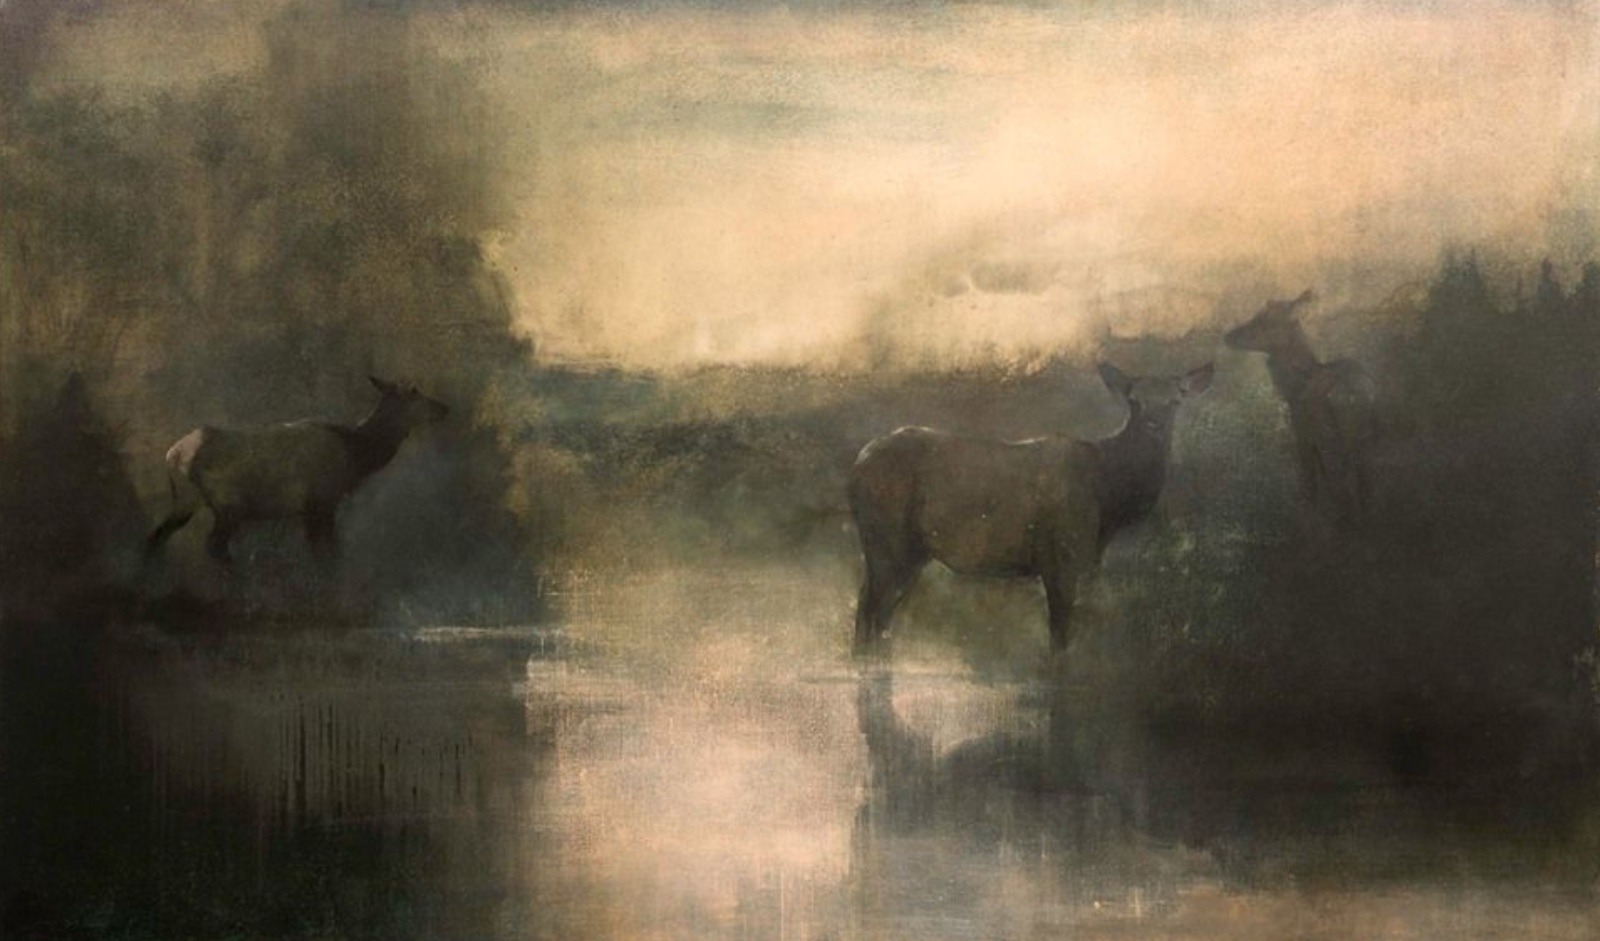 &quot;Three Matriarchs&quot; by Kathryn Turner. Turner, whose family runs a historic dude ranch in Jackson Hole, has grown up with nature exerting a mighty influence.  She is among a group of painters who are giving American wildlife art a new visual vocabulary.  Often, wildlife paintings feature male animals; this work celebrates female elk who hold the herd together.  For more information about Turner and her work, go to turnerfineart.com